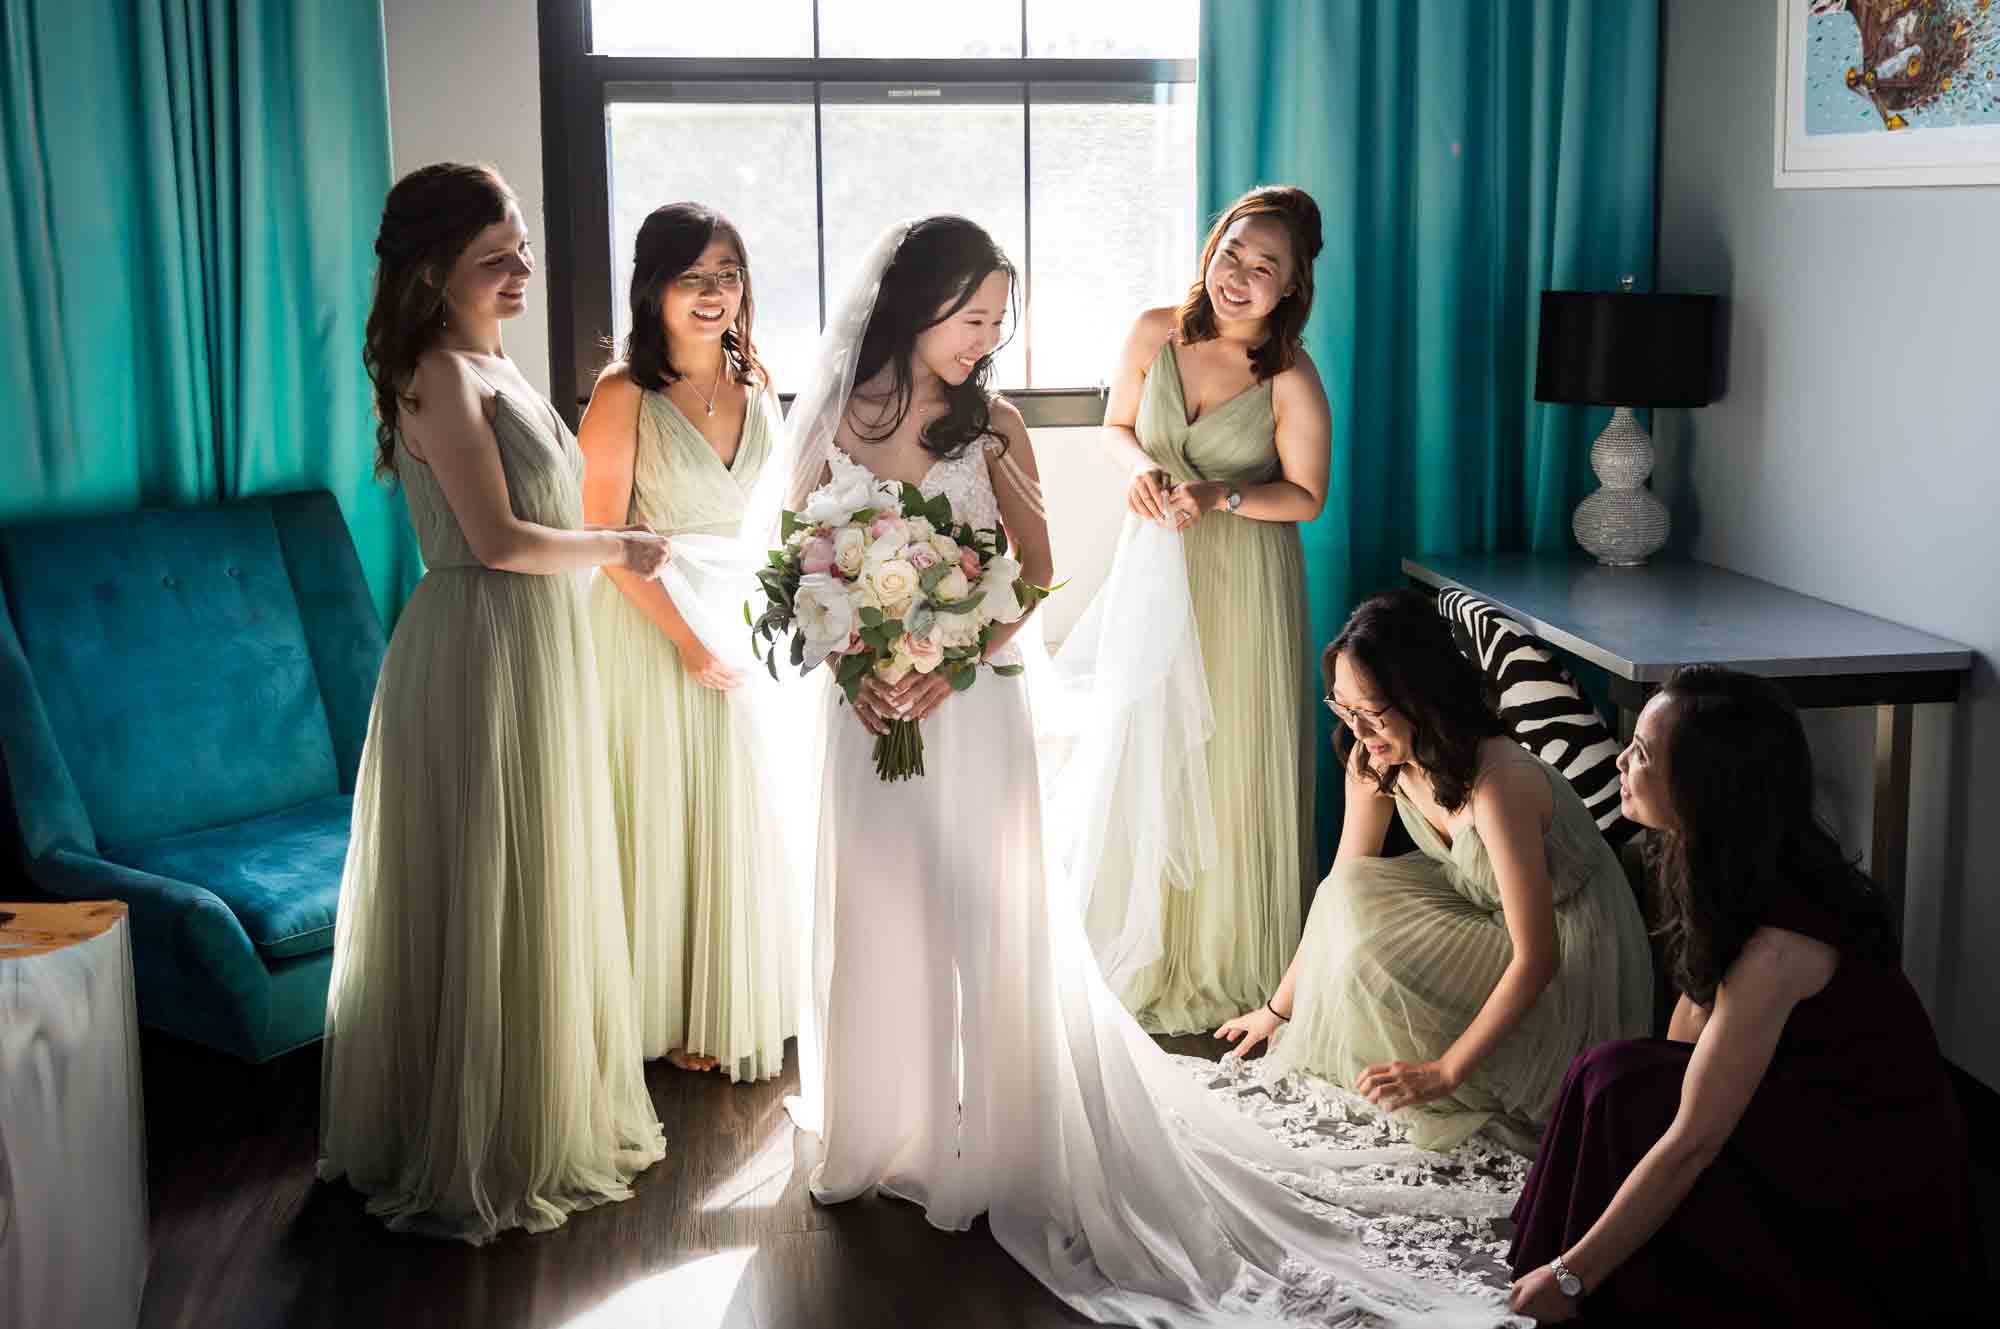 Bridesmaids helping bride with veil in front of window